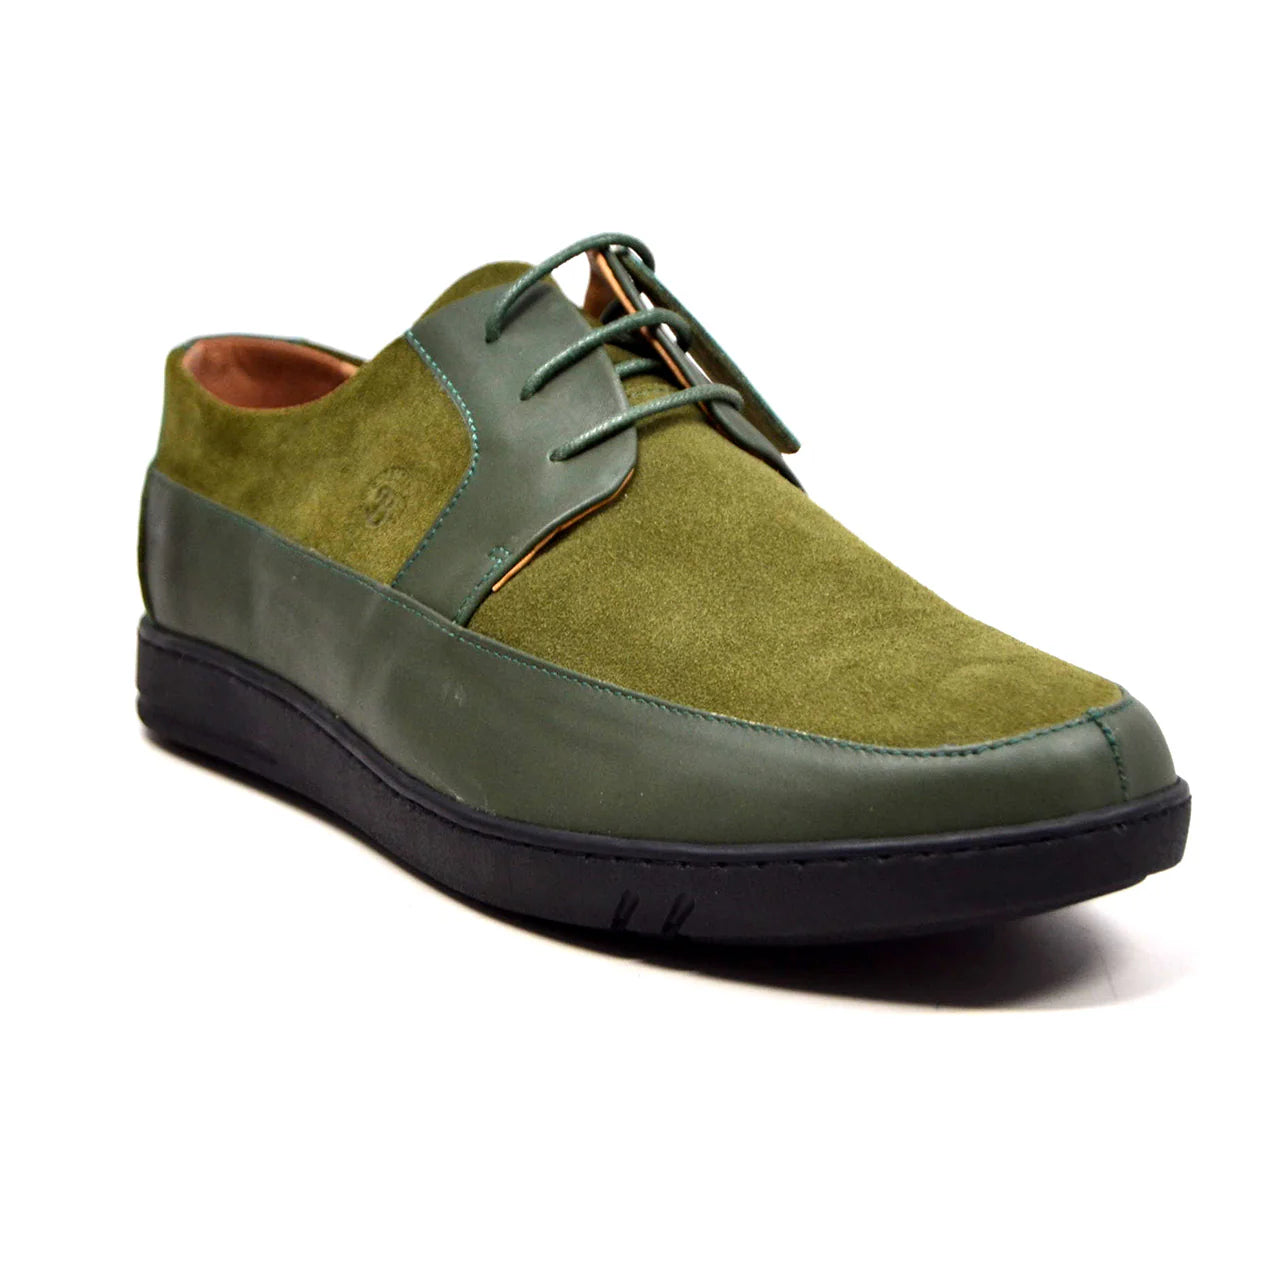 British Walkers Westminster Vintage Bally Style Men's Olive Green Leather and Suede Low Top Sneakers